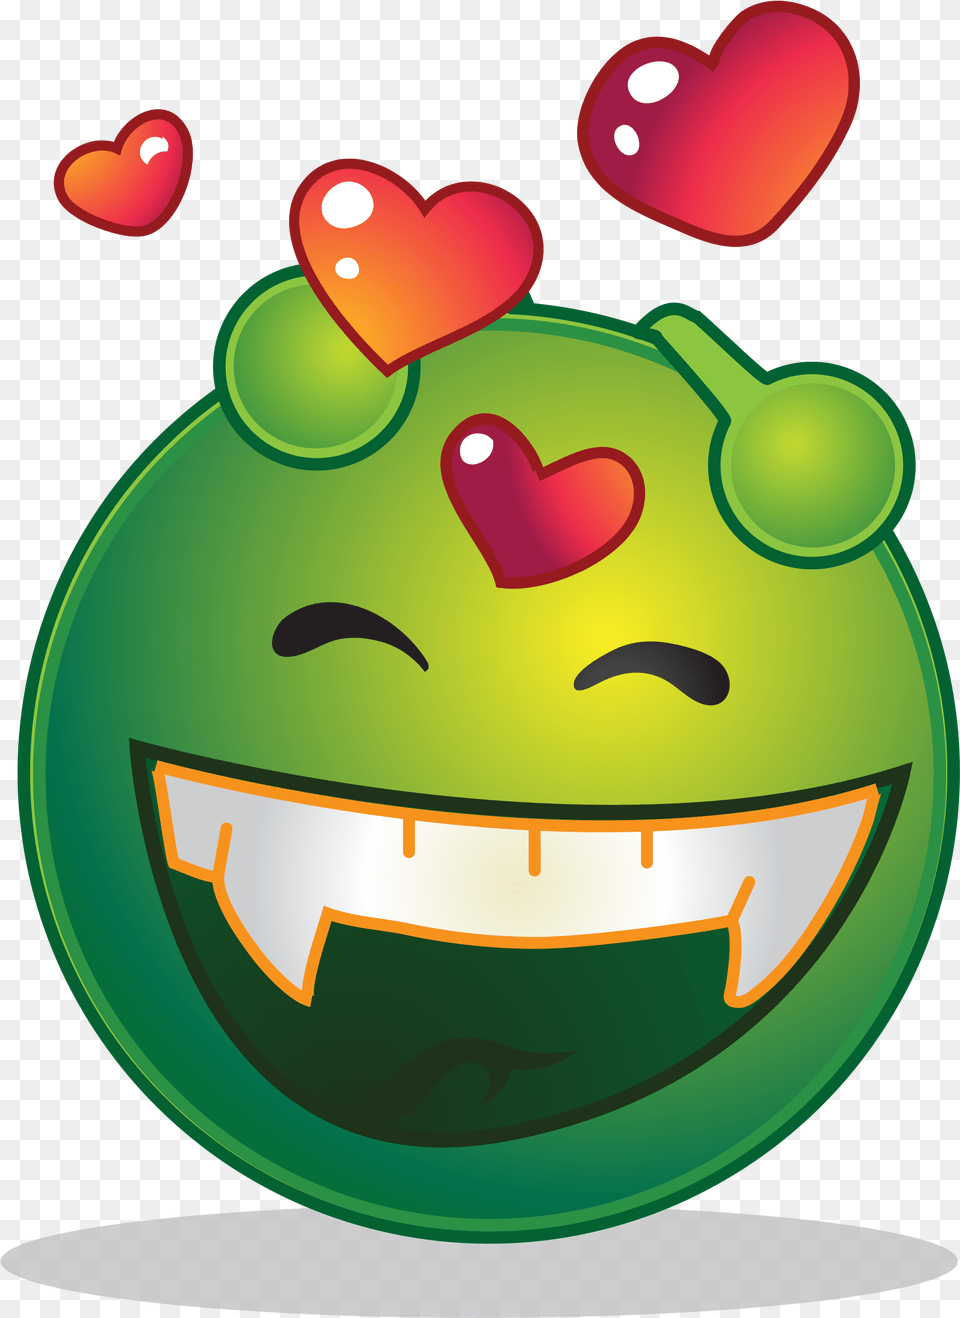 Alien Svg Believe Mood Off Images For Whatsapp Dp, Green Png